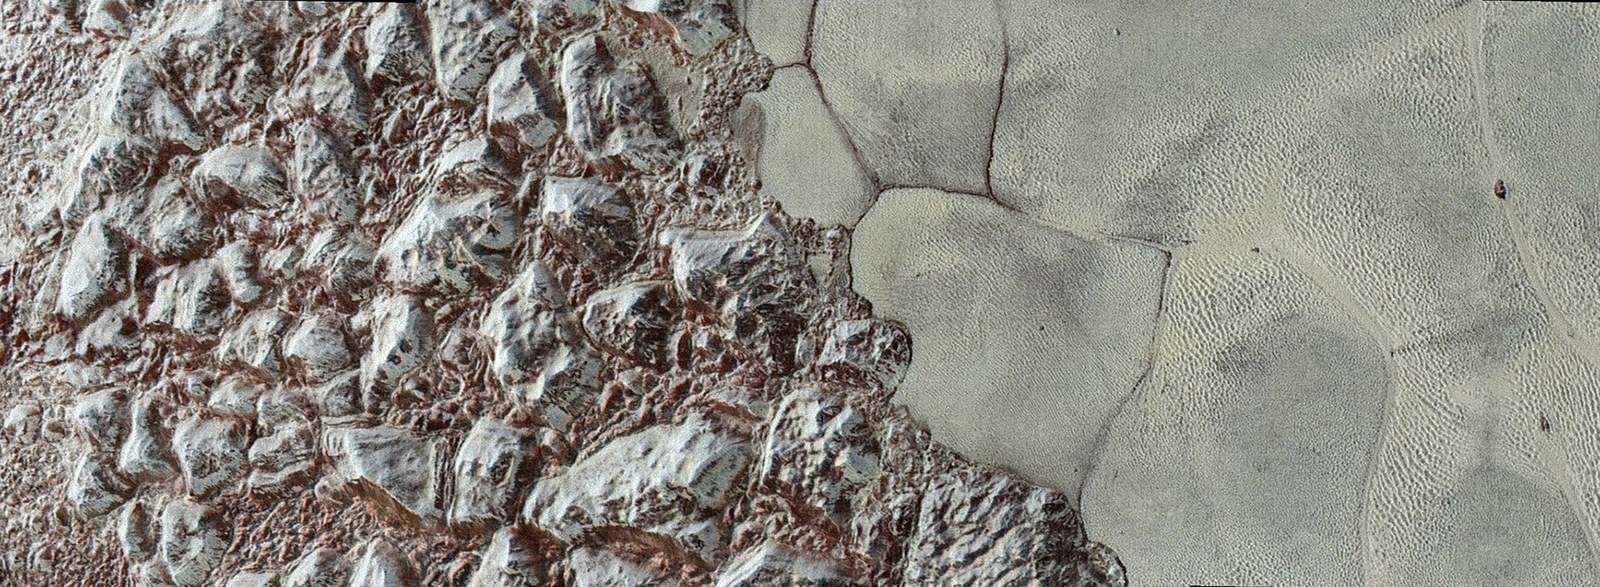 Frozen mountains on Pluto and ice polygons in Tombaugh Regio